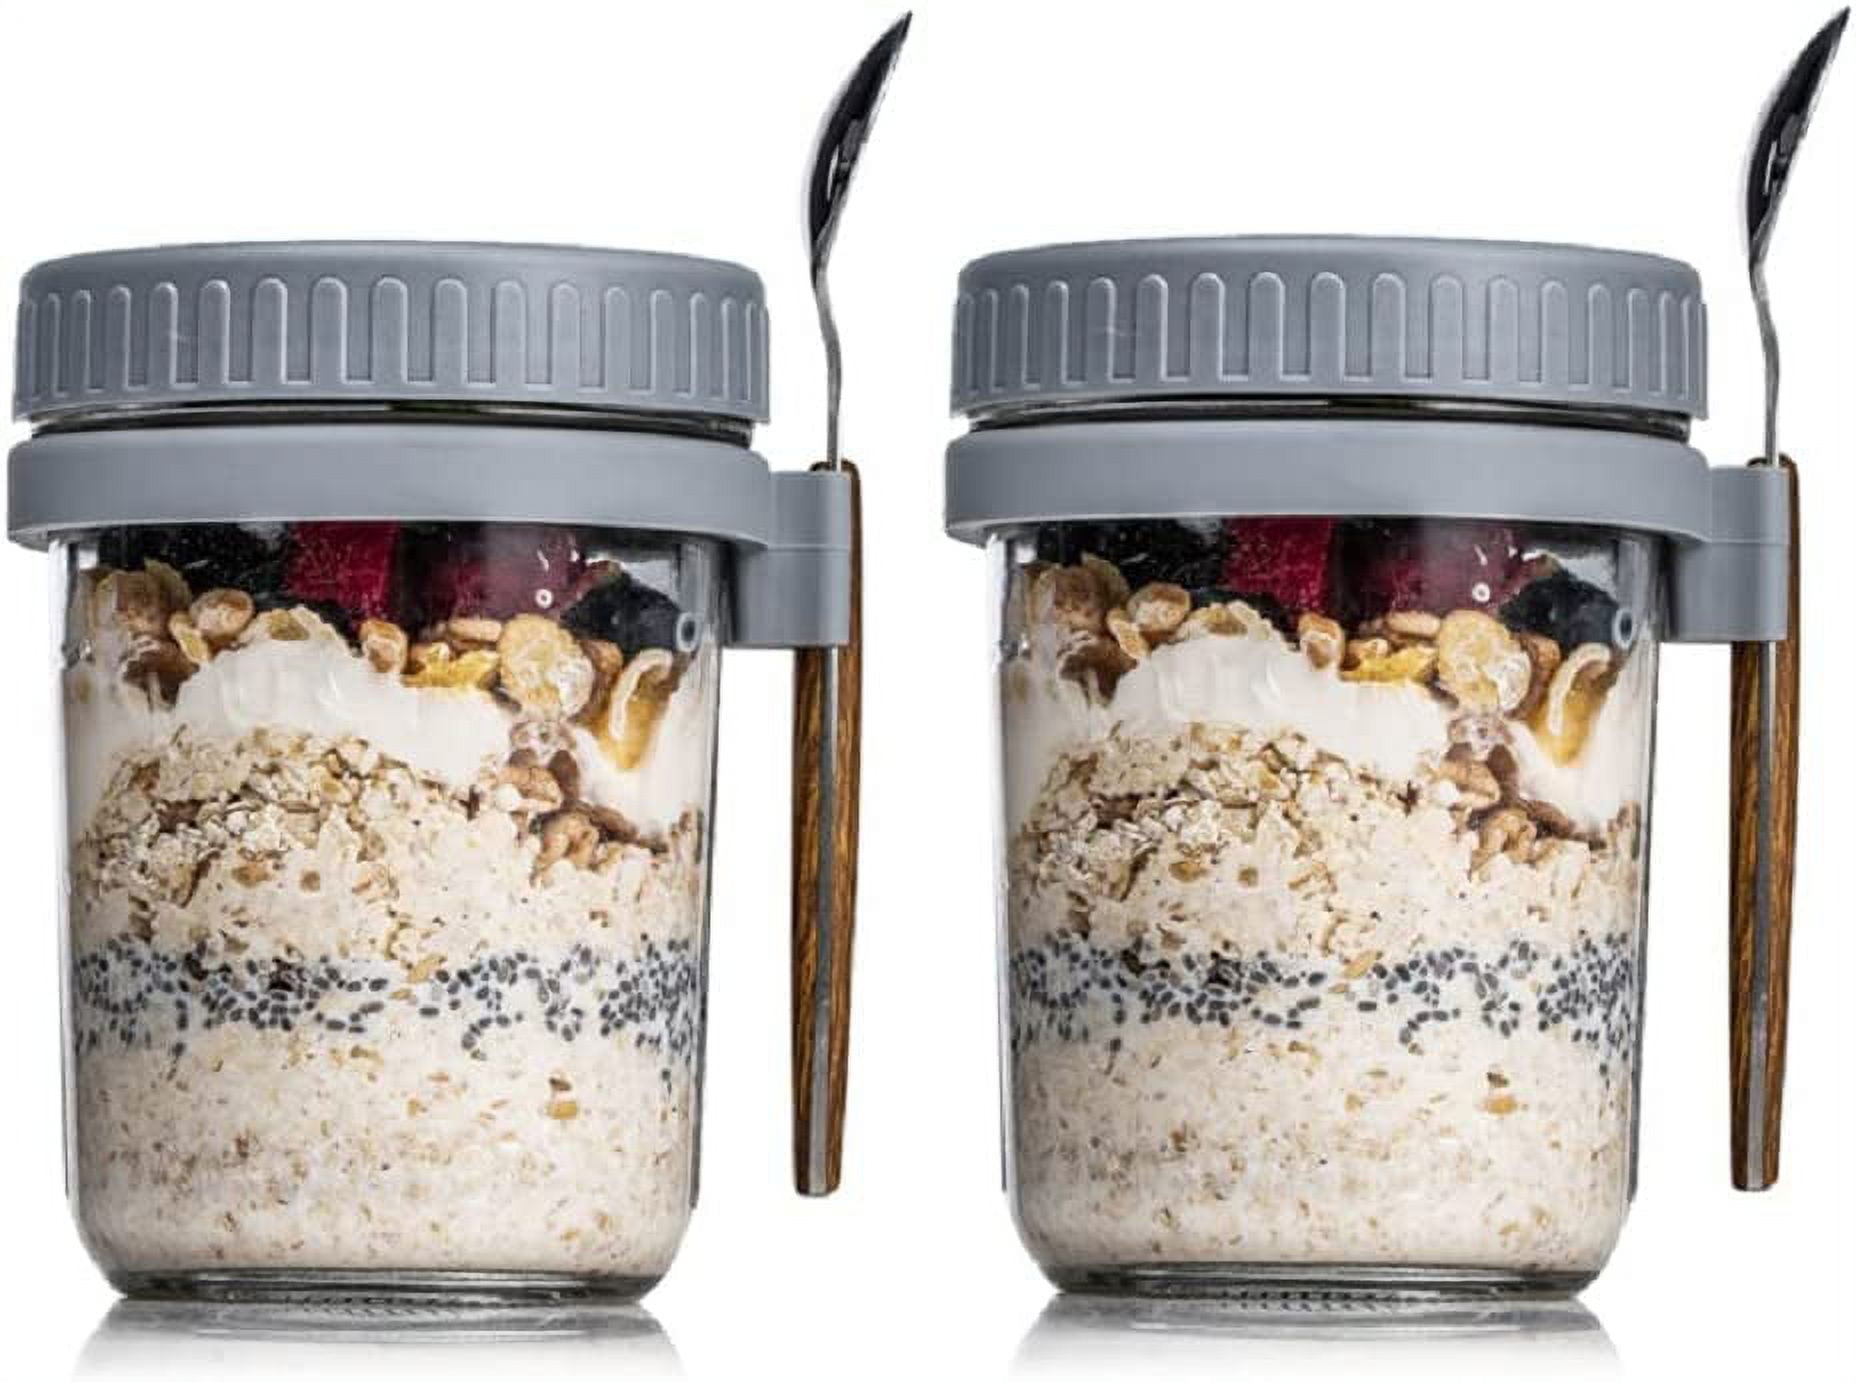 Xigugo Overnight Oats Container with Lid and Spoon, Overnight Oats Jars, 16  oz Cereal, Milk, Vegetable and fruit Salad Storage Container with